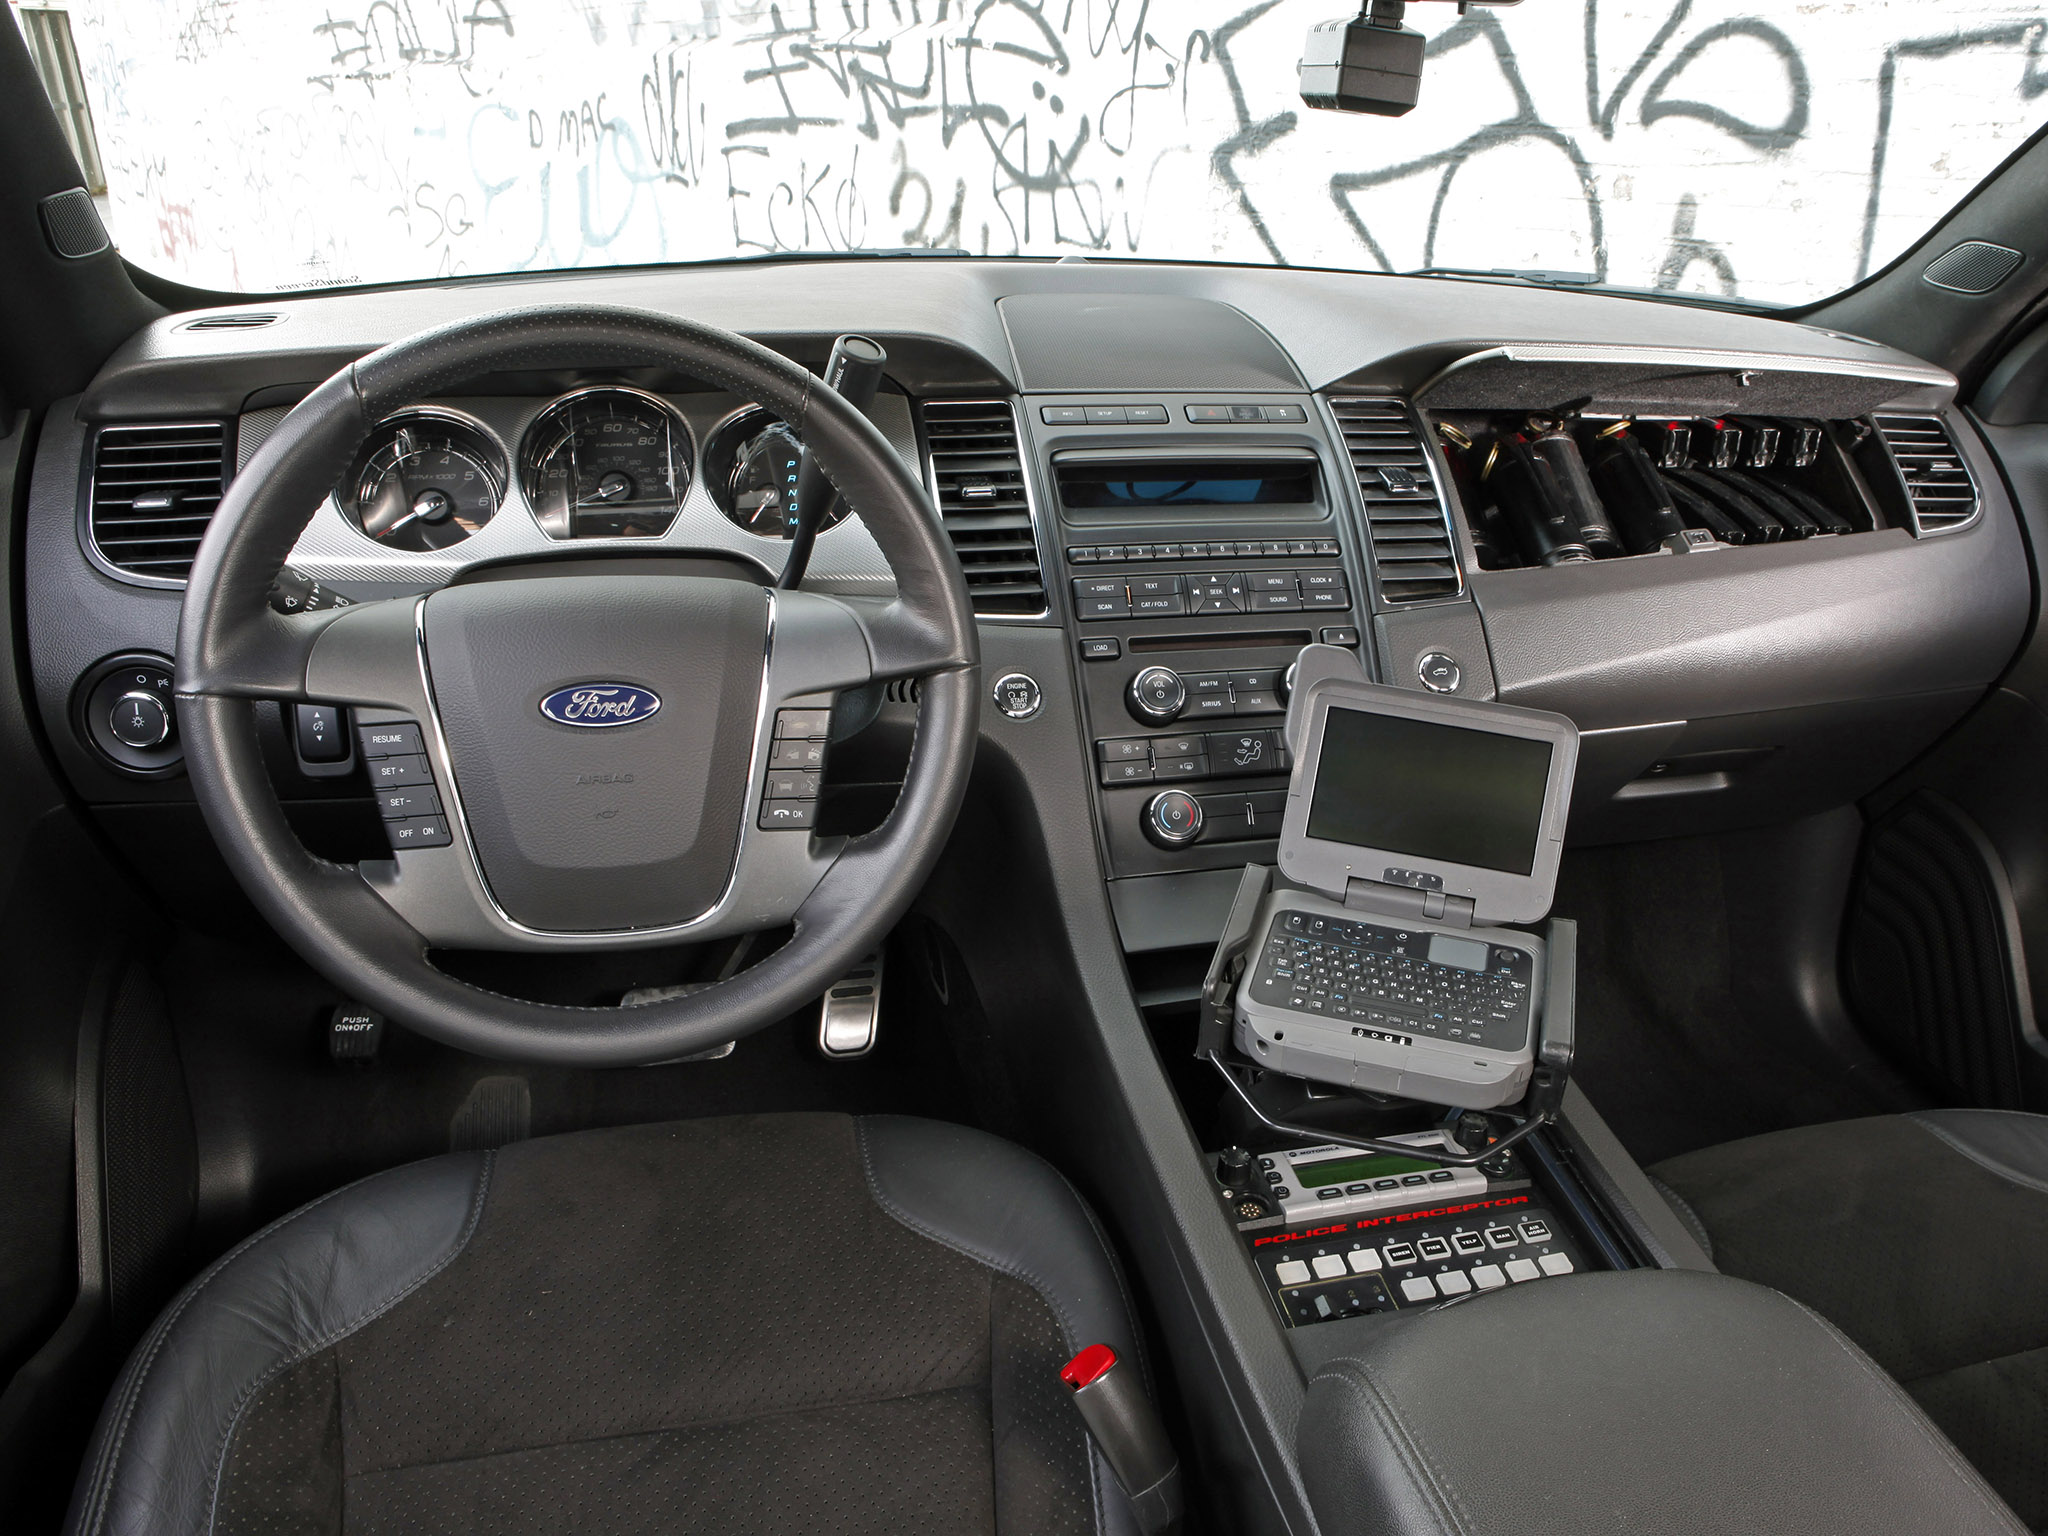 2013, Ford, Stealth, Police, Interceptor, Muscle, Interior, Computer Wallpaper